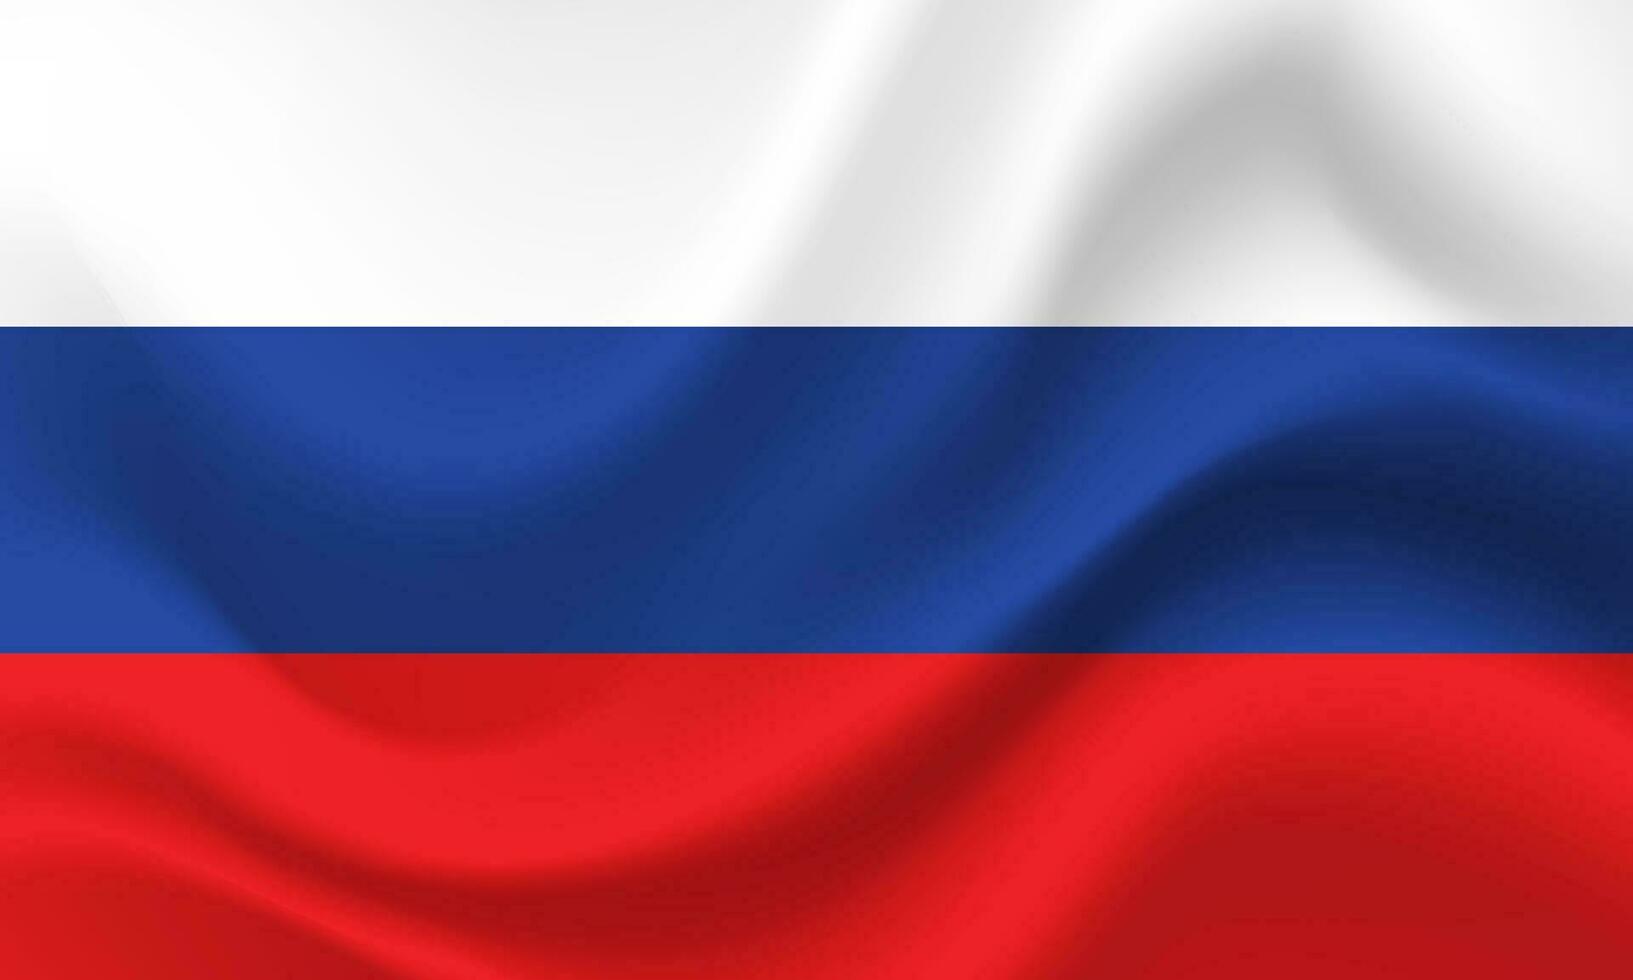 Vector Russia flag. Waved Flag of Russia. Russia emblem, icon.